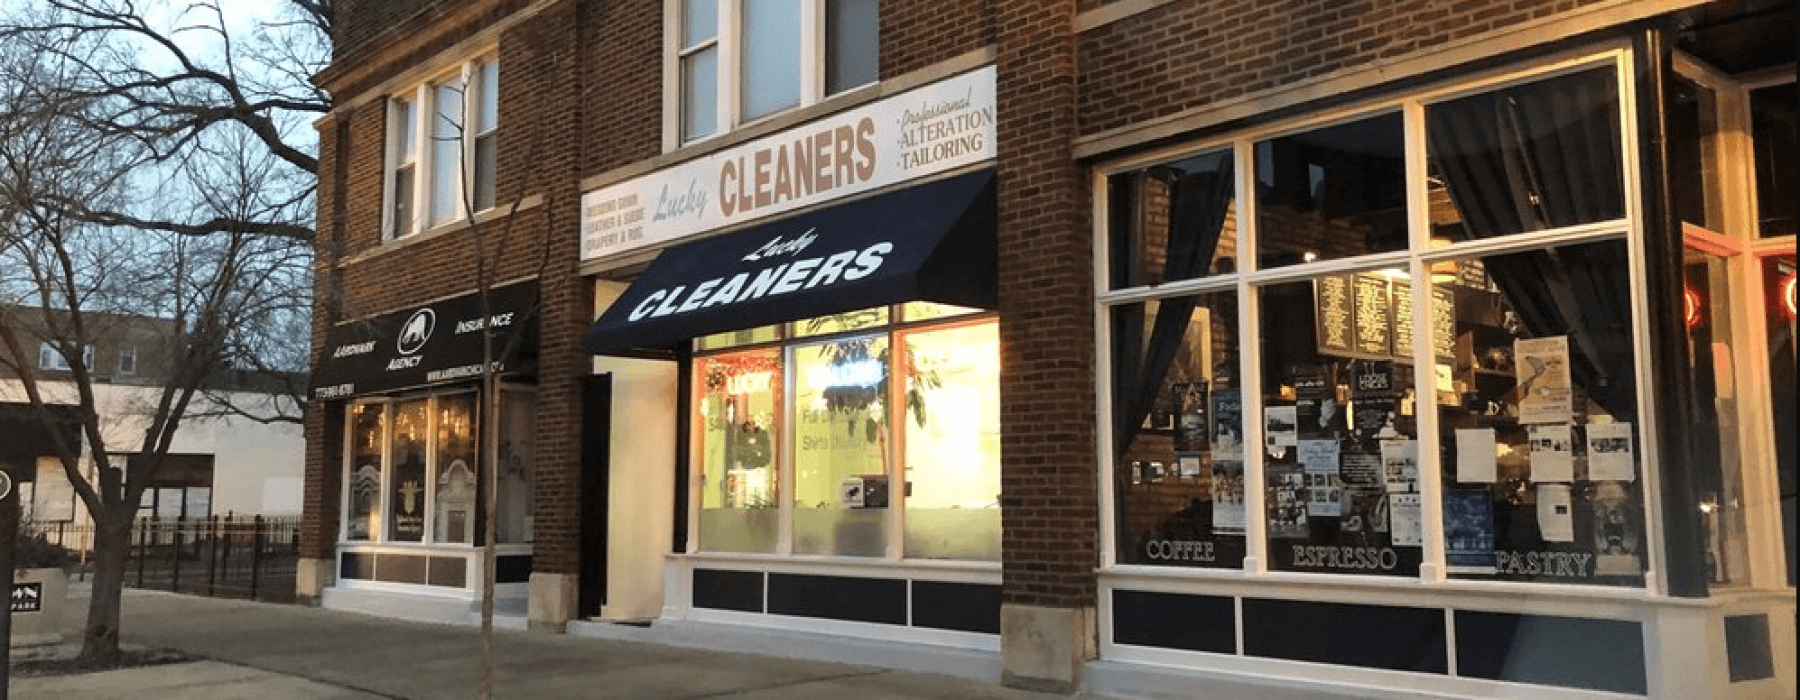 The best dry cleaners in Uptown